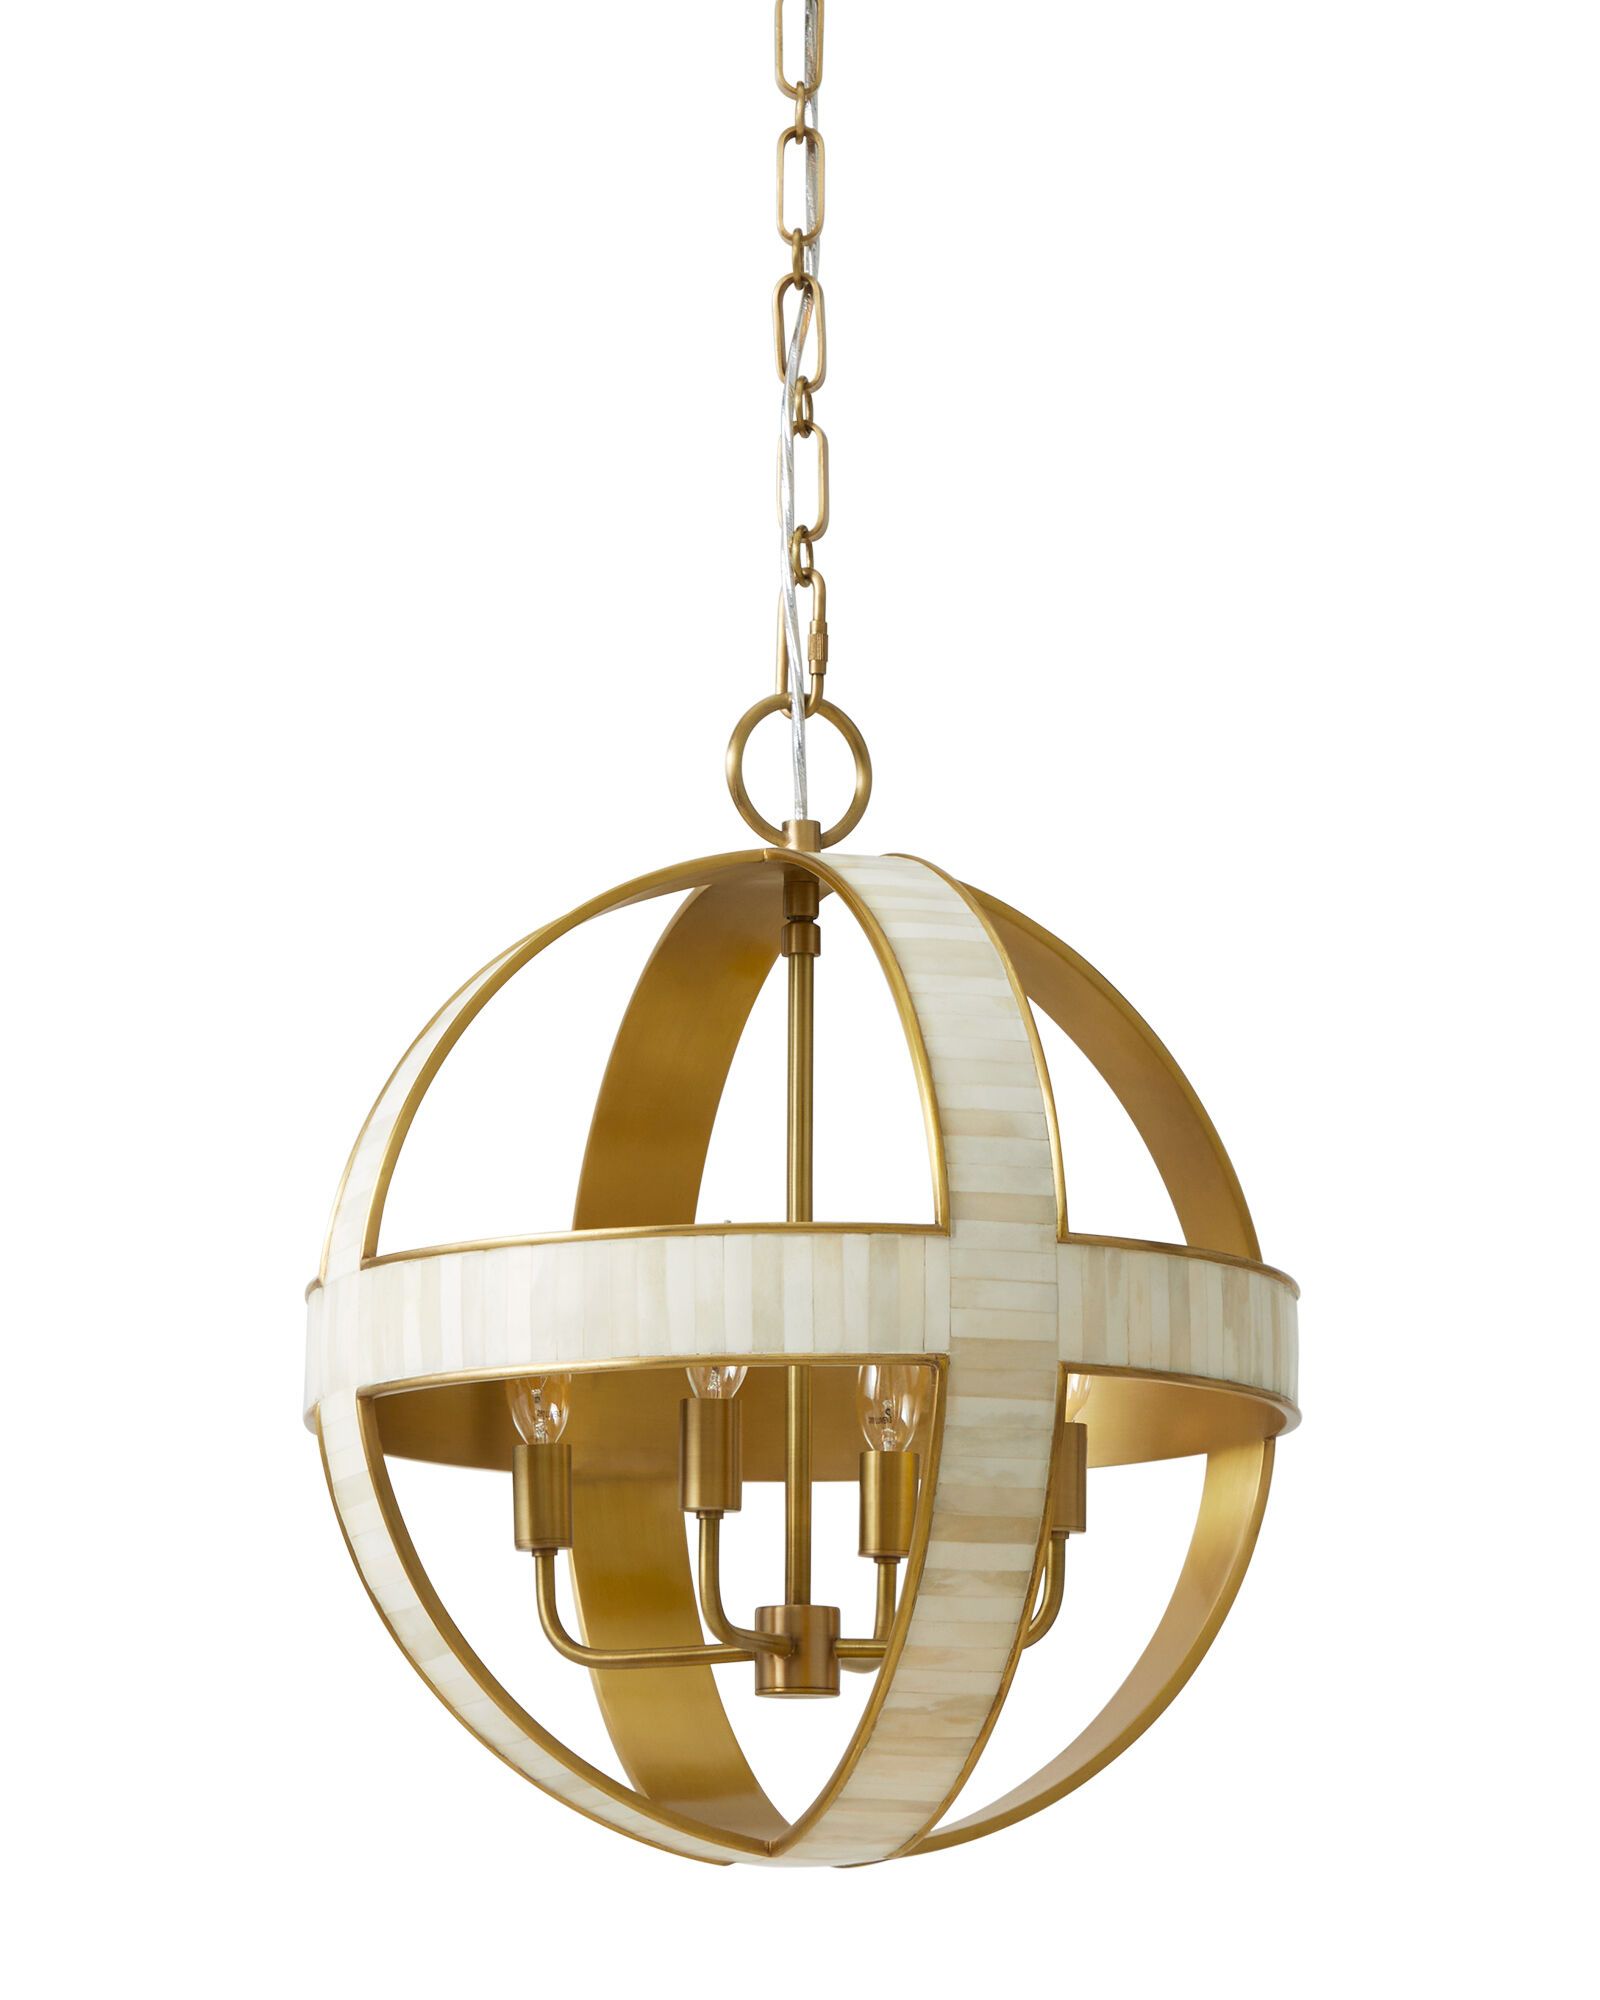 Greenport Round Pendant | Serena and Lily